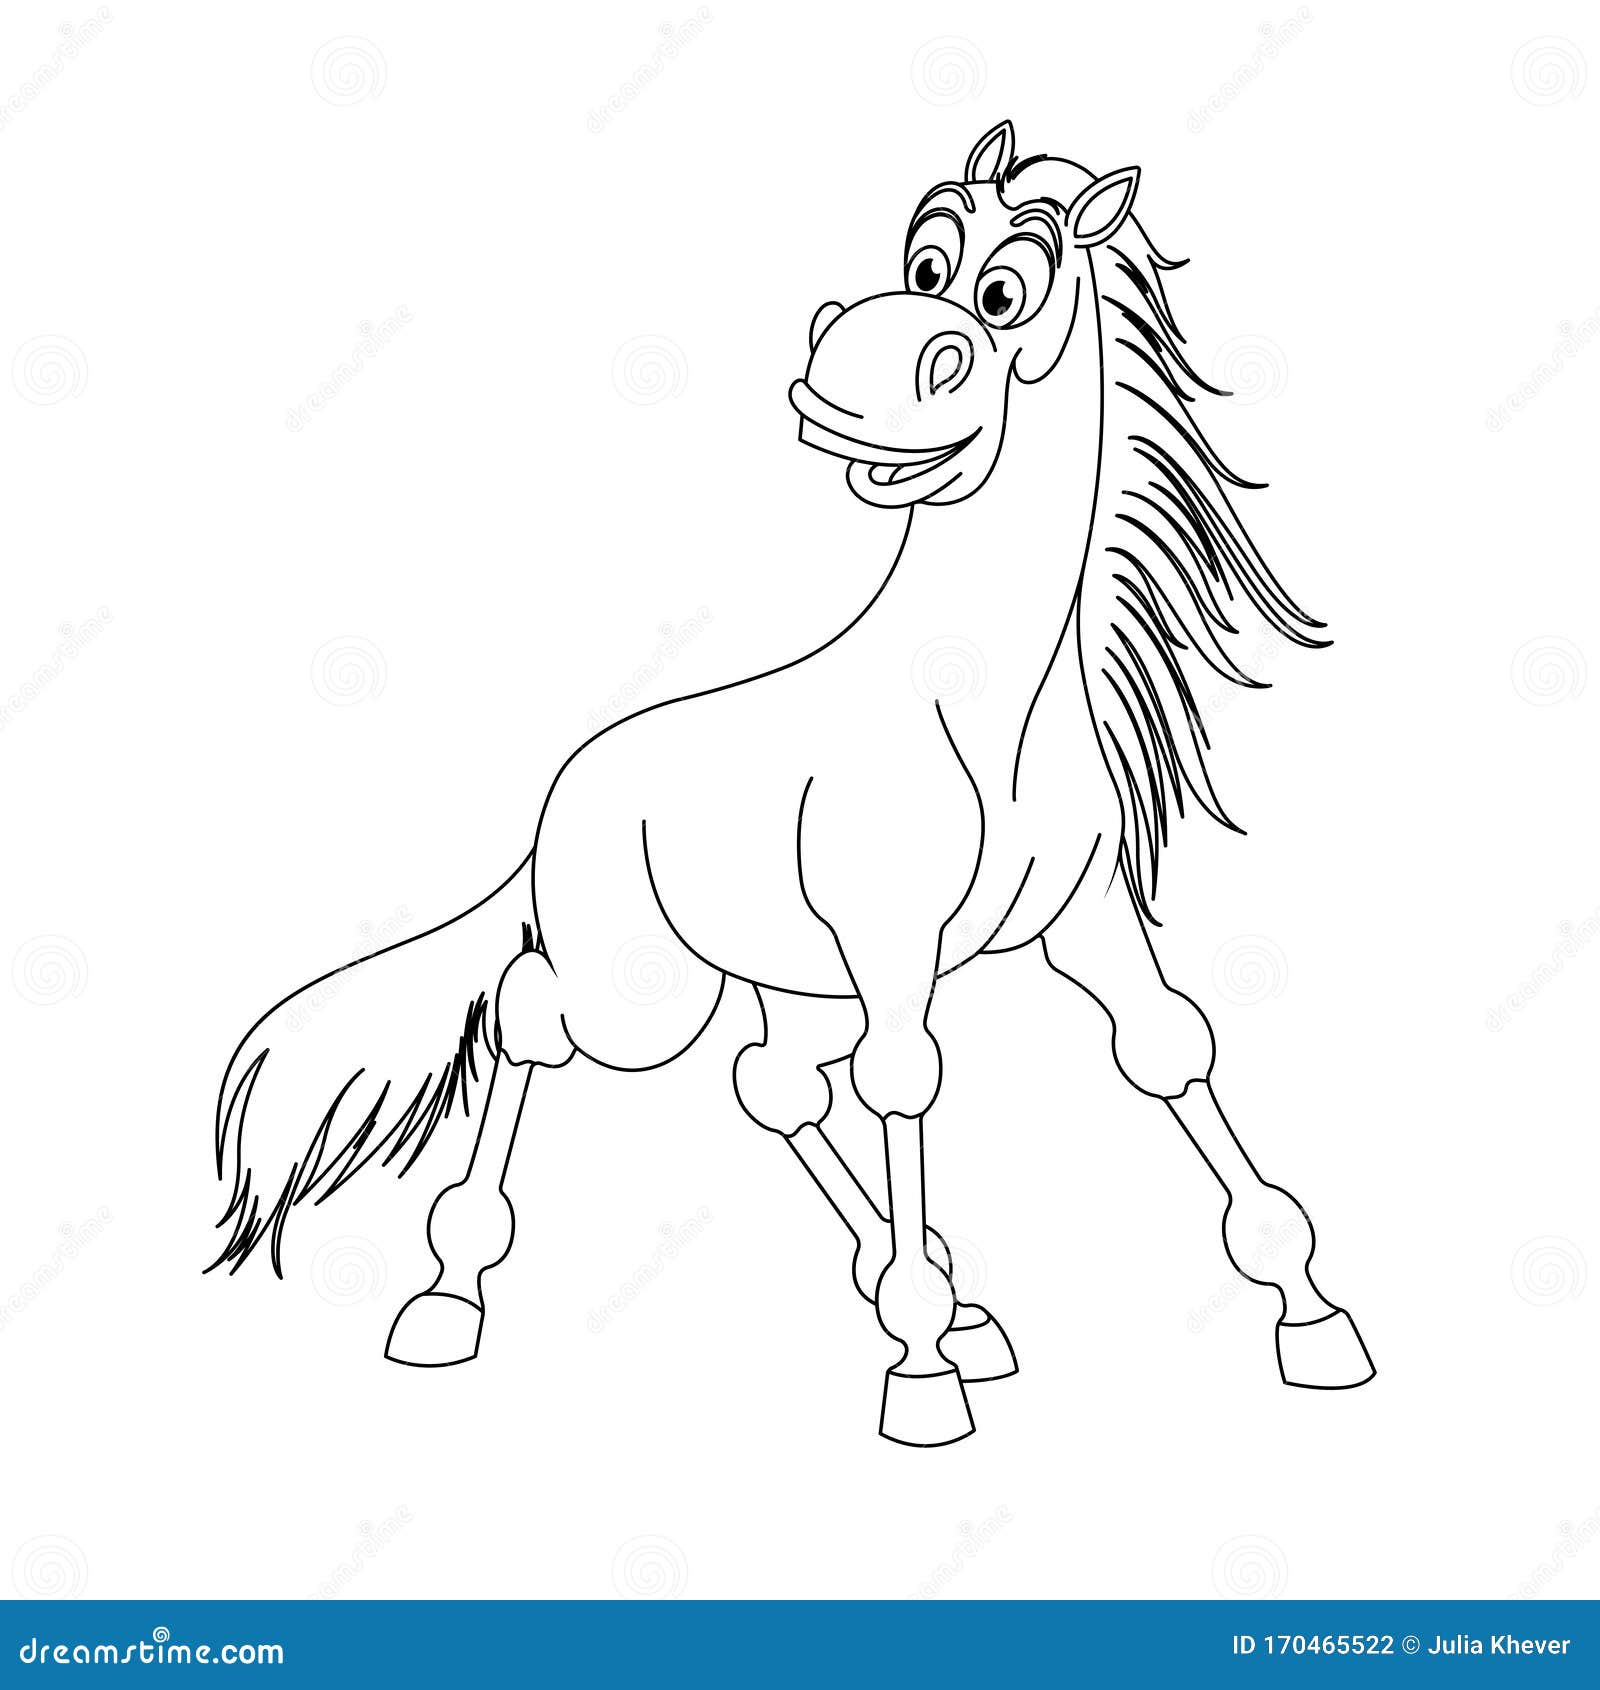 20+ Spirit Horse Coloring Page